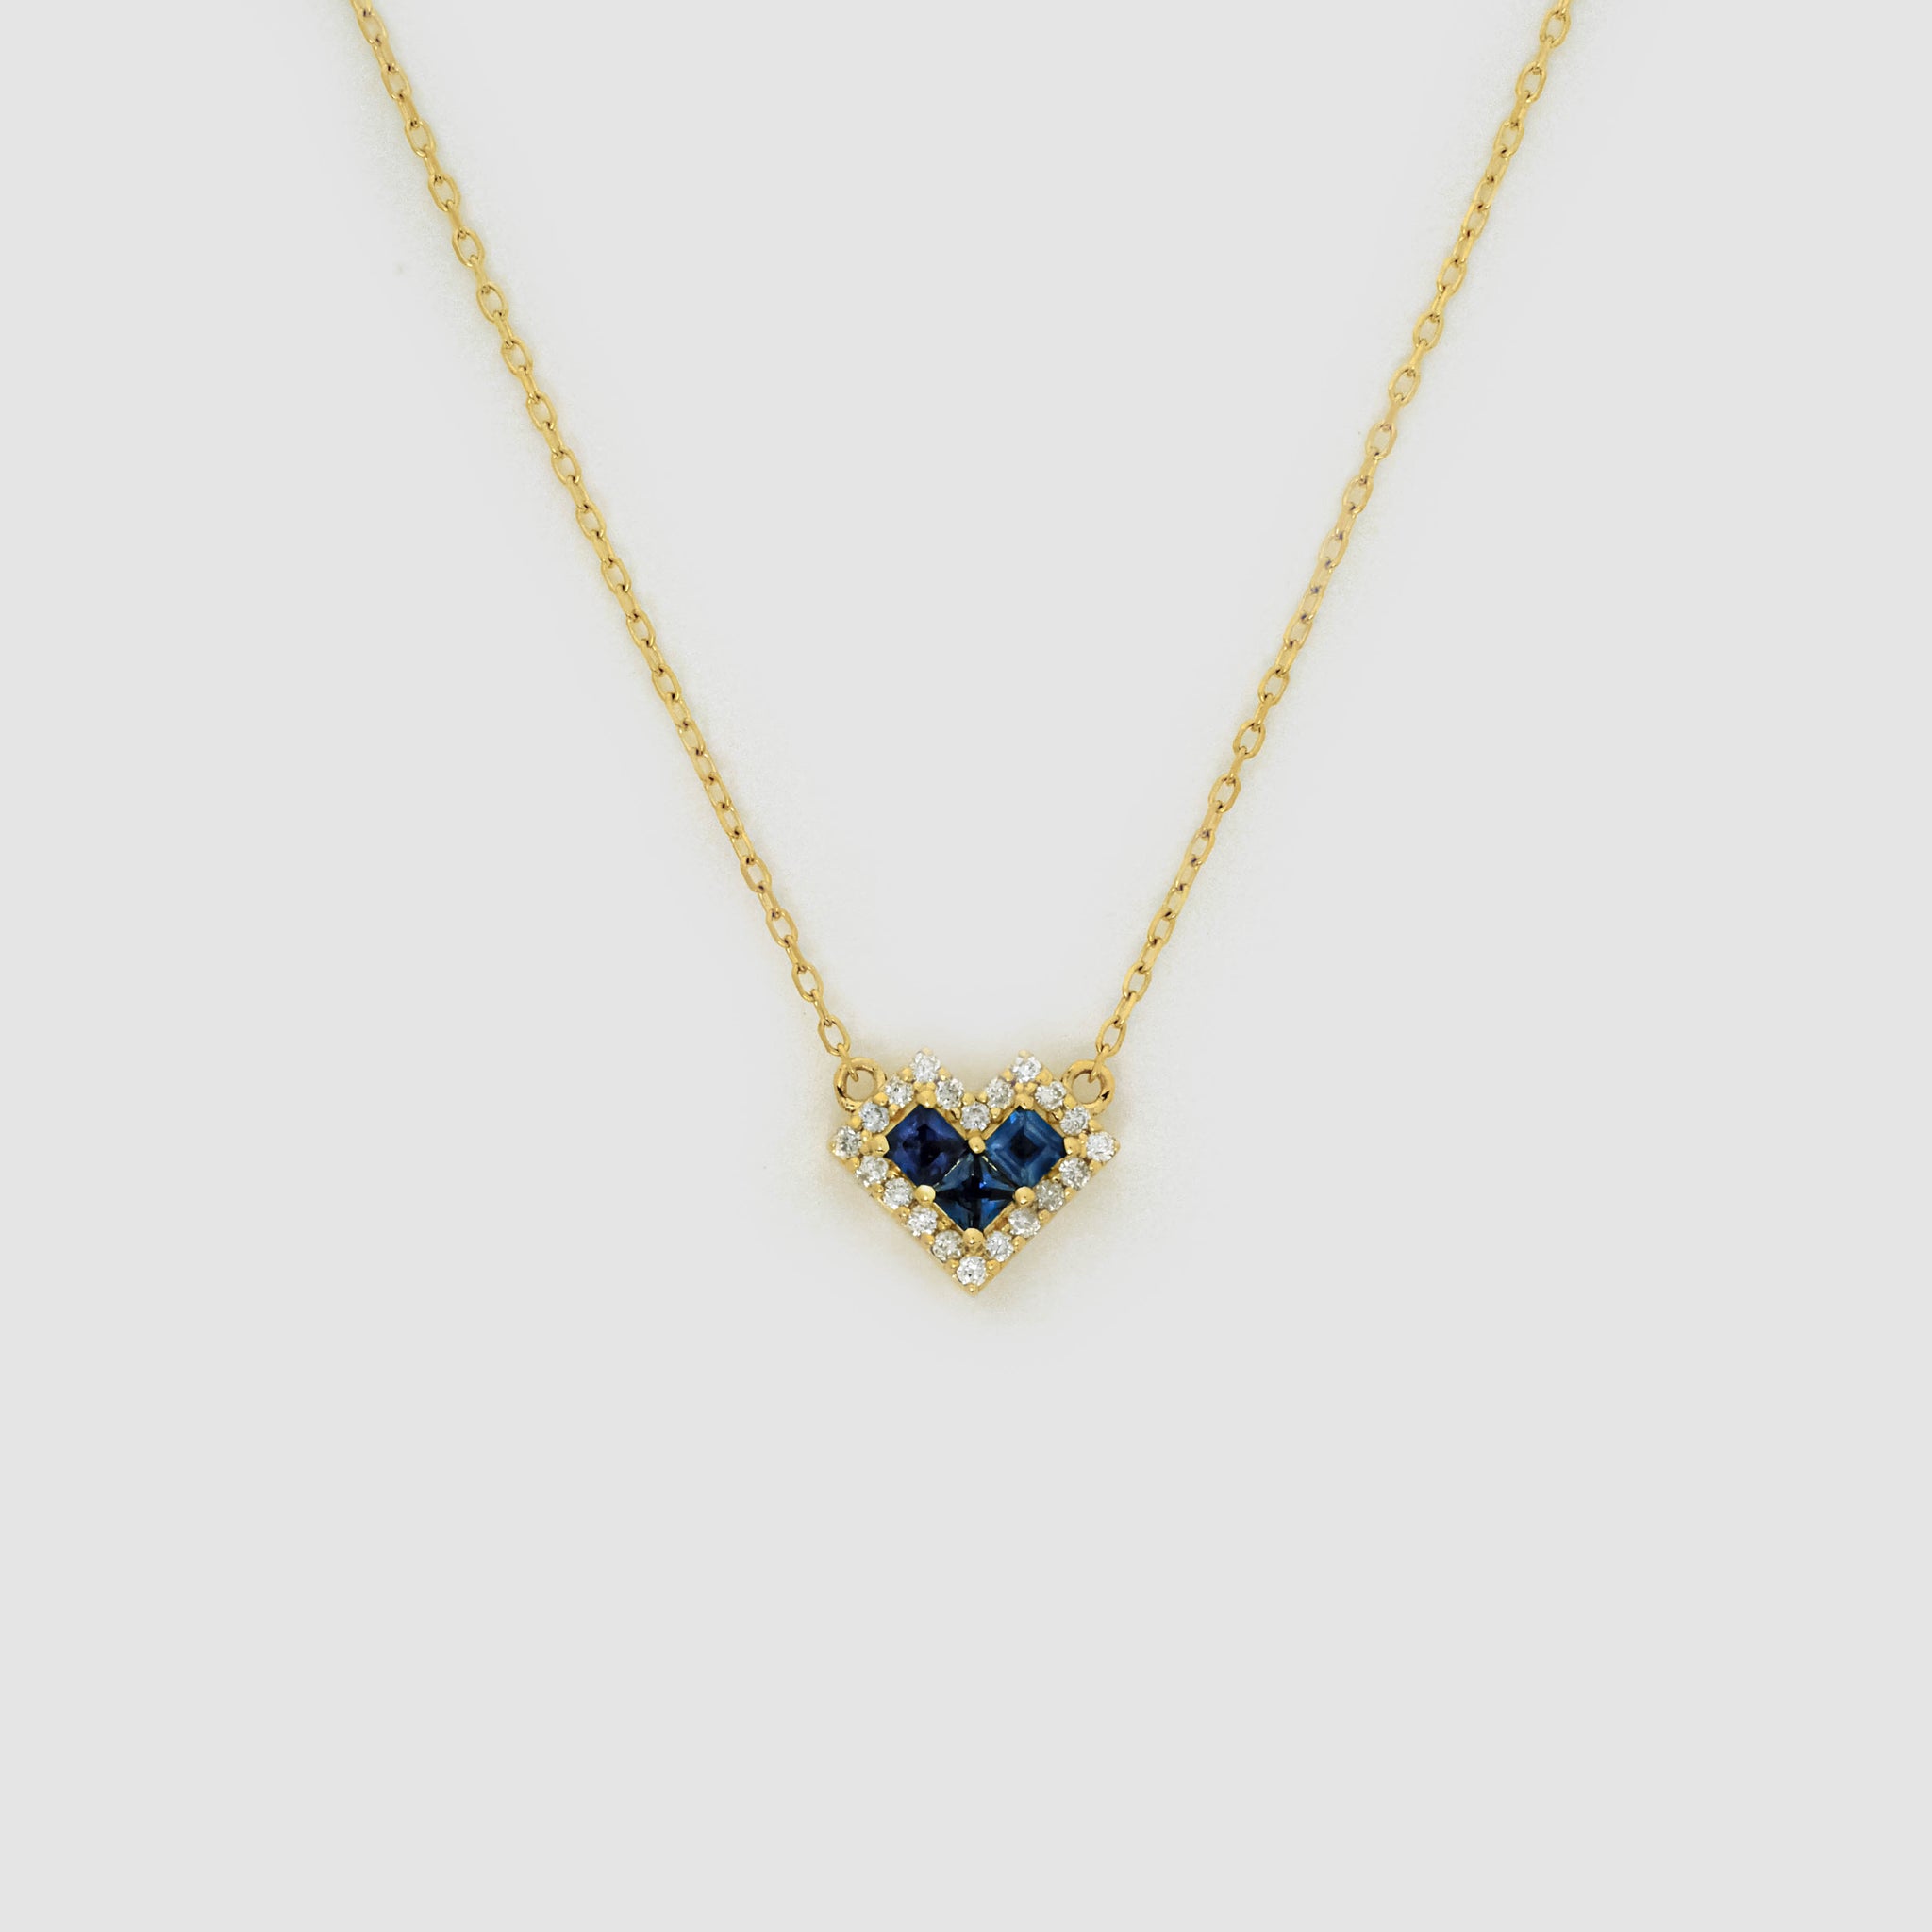 Sapphire Diamond Heart Necklace, 18k solid gold